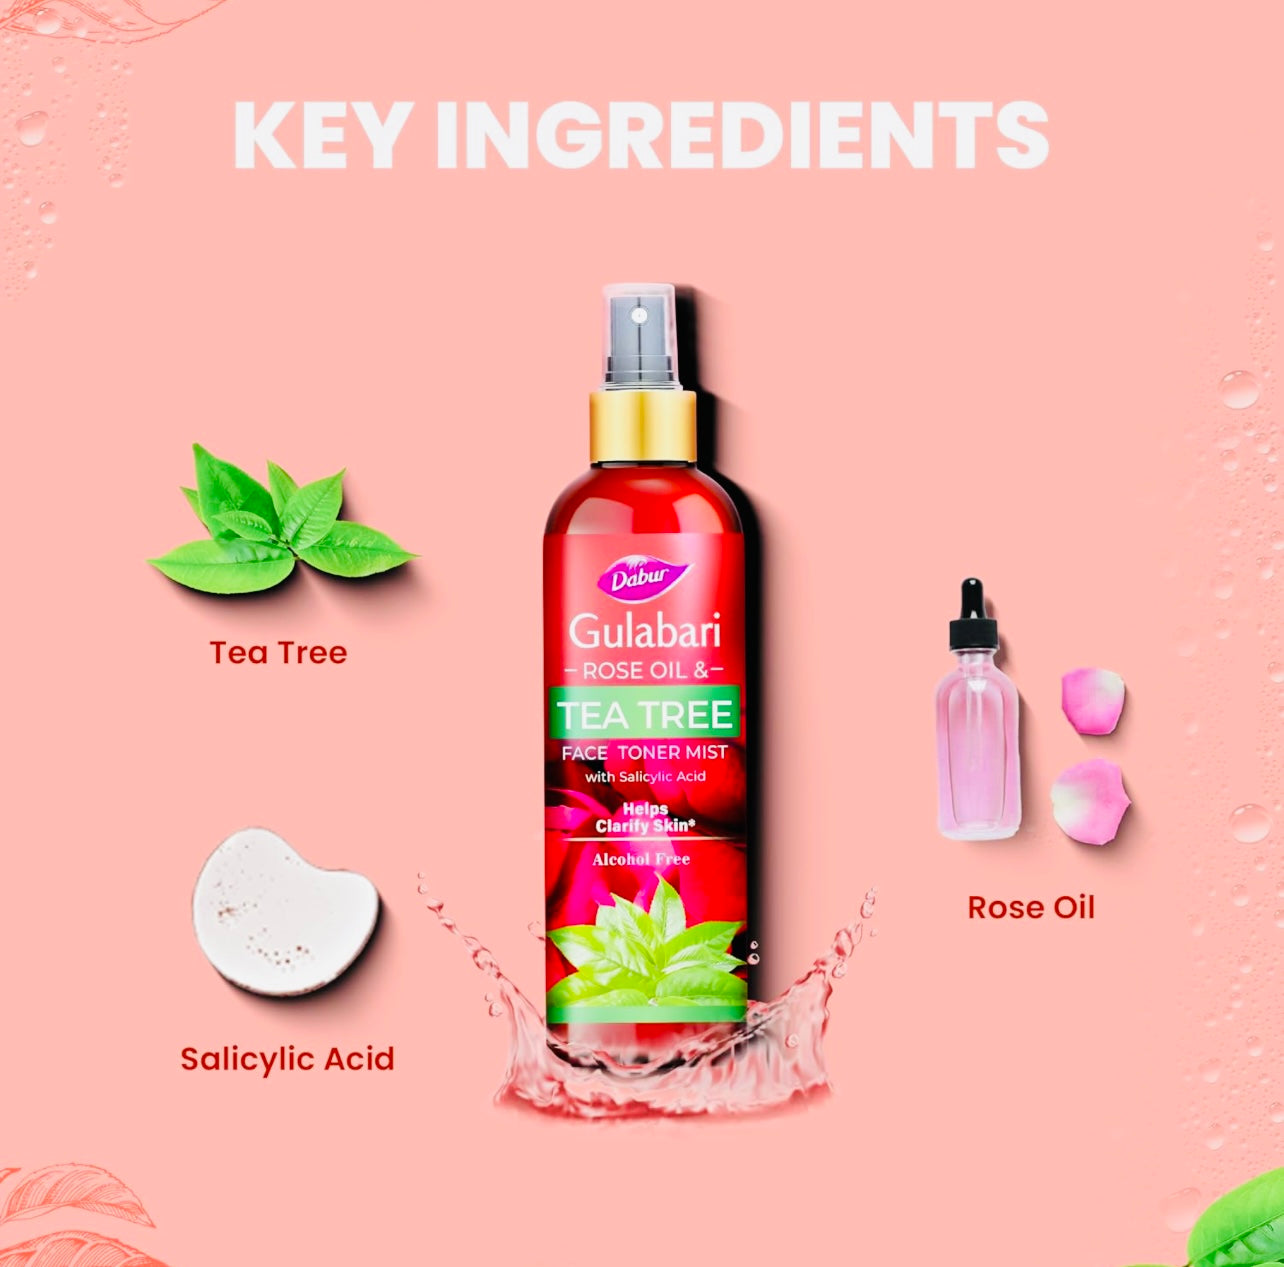 Dabur Gulabari Rose Oil & Tea Tree Face Toner Mist & Rosewater with Salicylic Acid - 200ml | Treats breakouts, blackheads, and whiteheads | Tightens and Refines Pores | Alcohol free